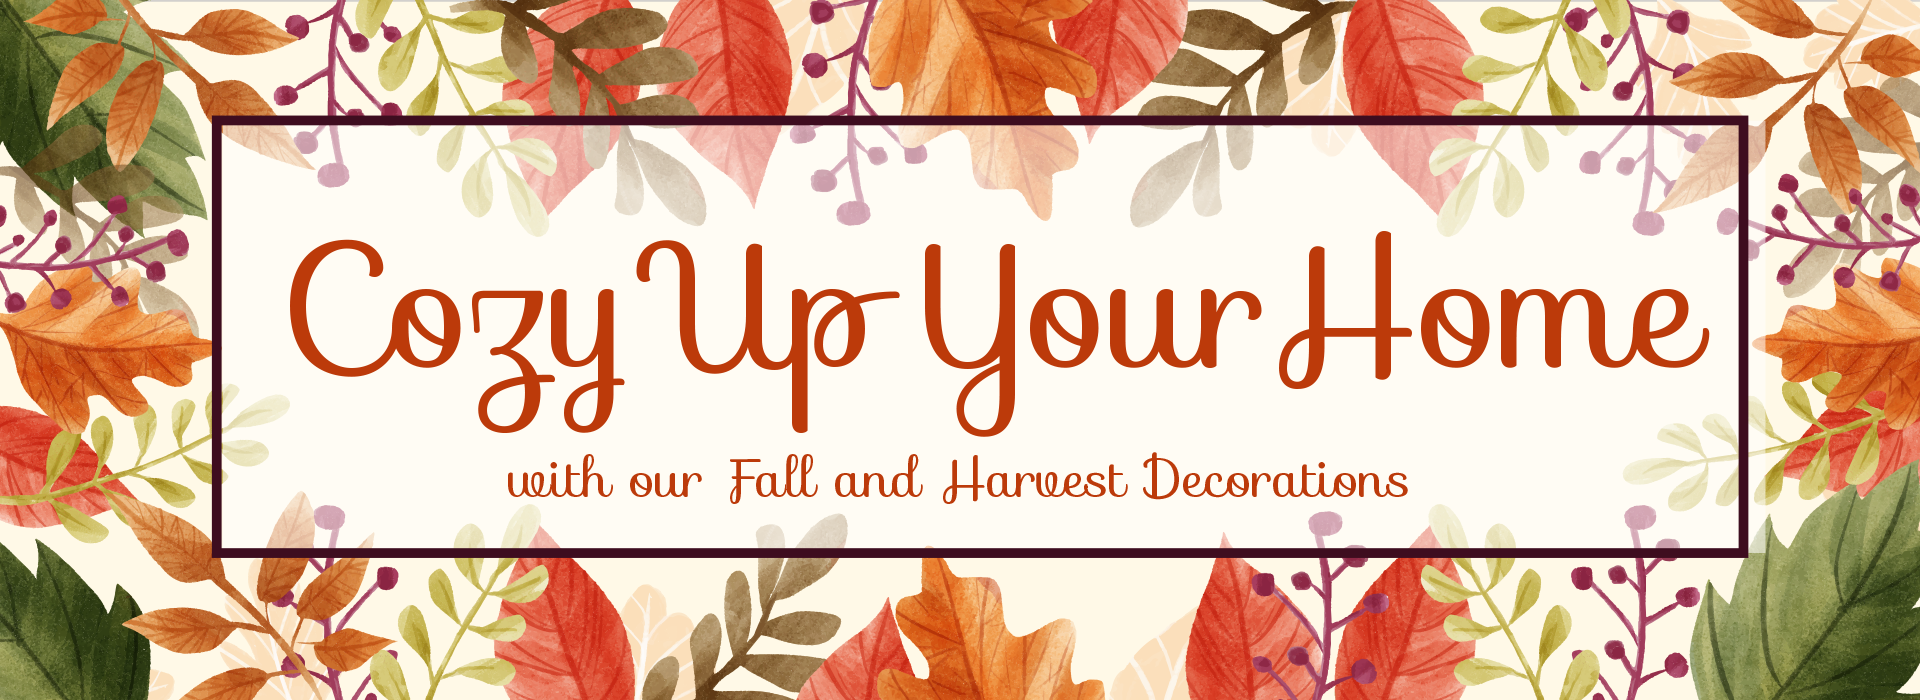 Cozy Up Your Home with our Fall and Harvest Decorations